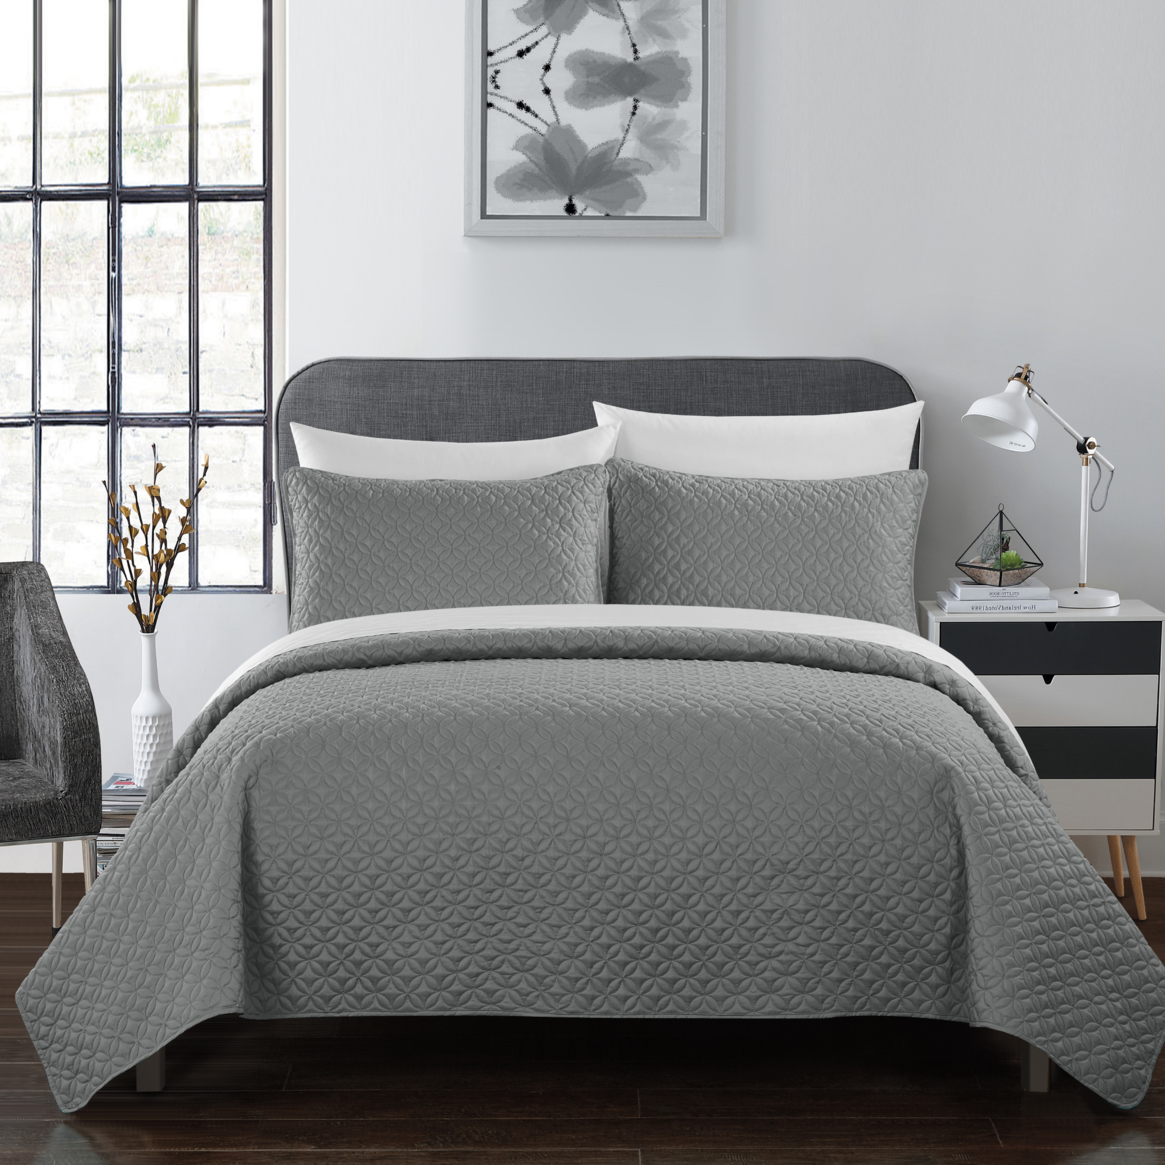 Gideon 7 Or 5 Piece Quilt Cover Set Rose Star Geometric Quilted Bed In A Bag - Sheet Set Decorative Pillow Shams Included - Grey, Twin